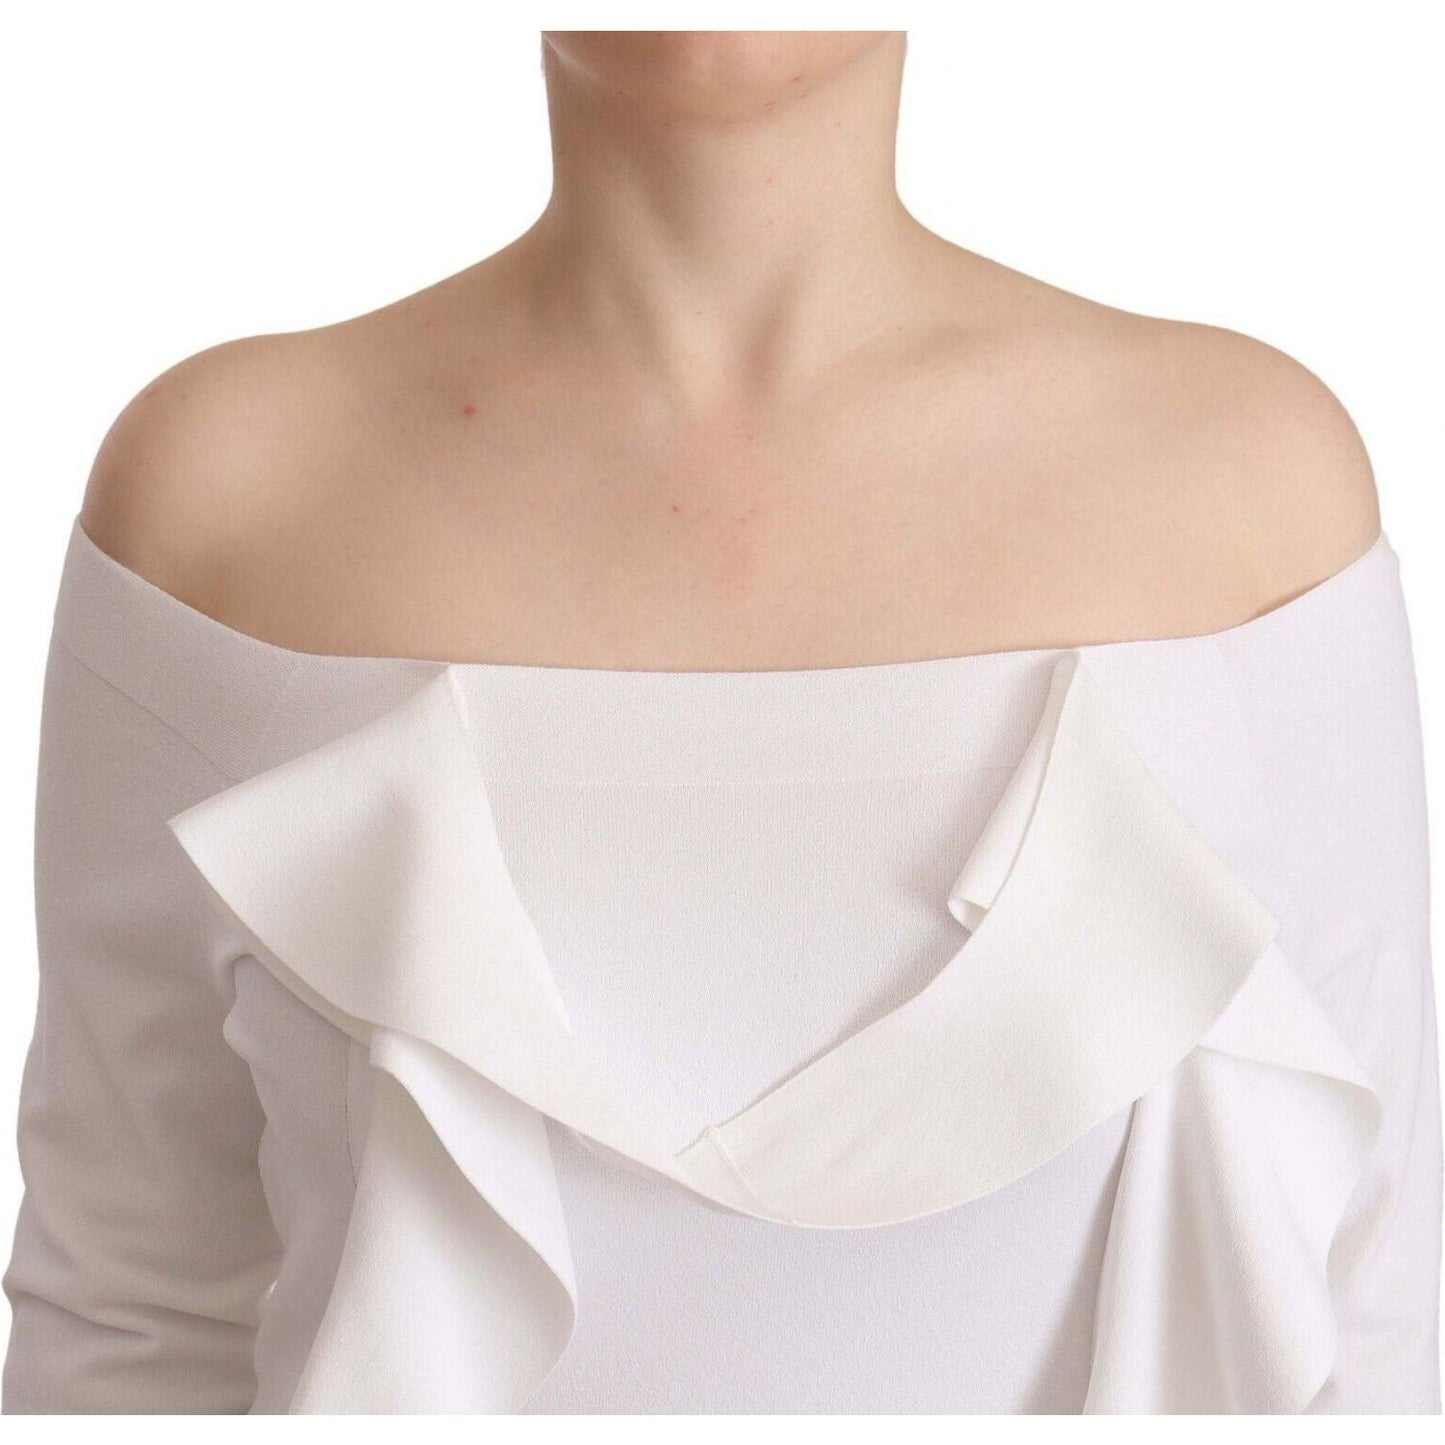 EXTERIOR Chic Off-Shoulder Long Sleeve Blouse WOMAN TOPS AND SHIRTS white-long-sleeves-off-shoulder-women-top-blouse